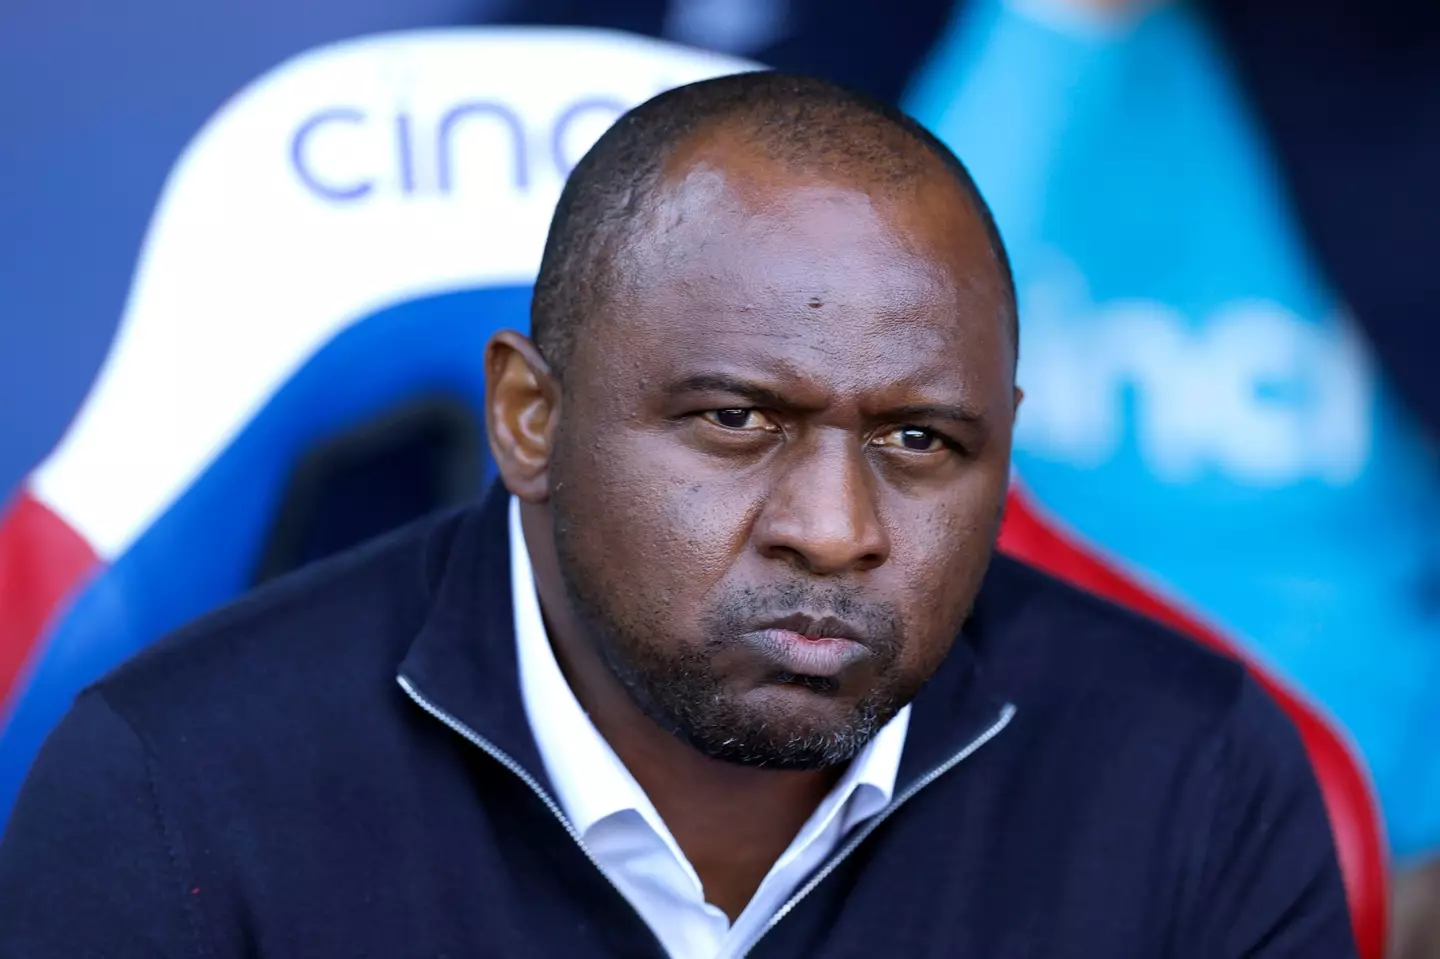 Patrick Vieira is the only black manager who is in charge of a Premier League side.